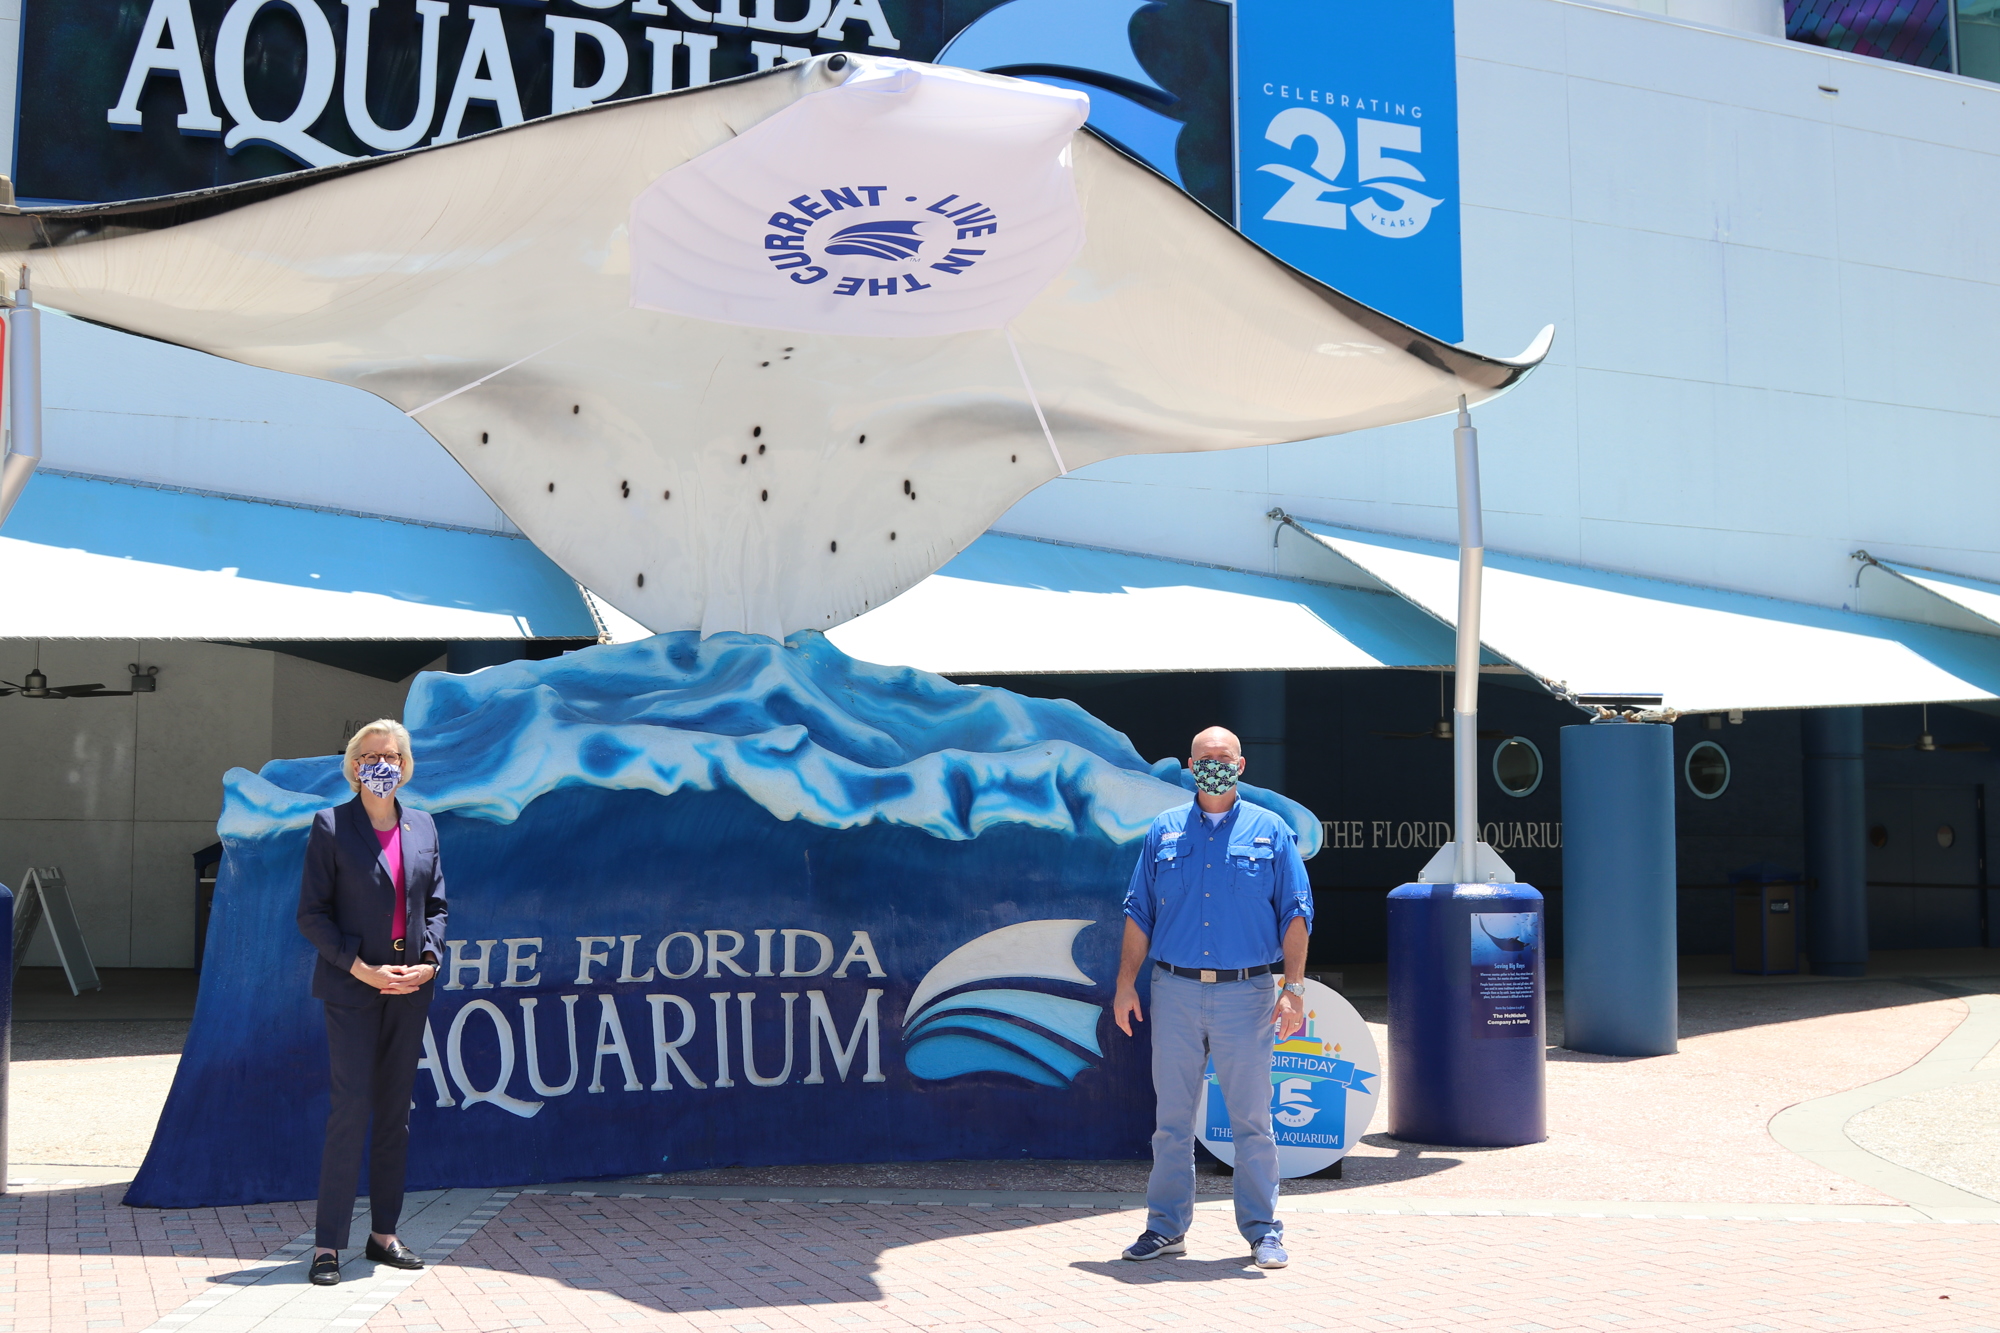 Courtesy. Tampa Mayor Jane Castor and Florida Aquarium CEO Roger Germann wearing face masks, along with the aquarium's giant manta ray statue.